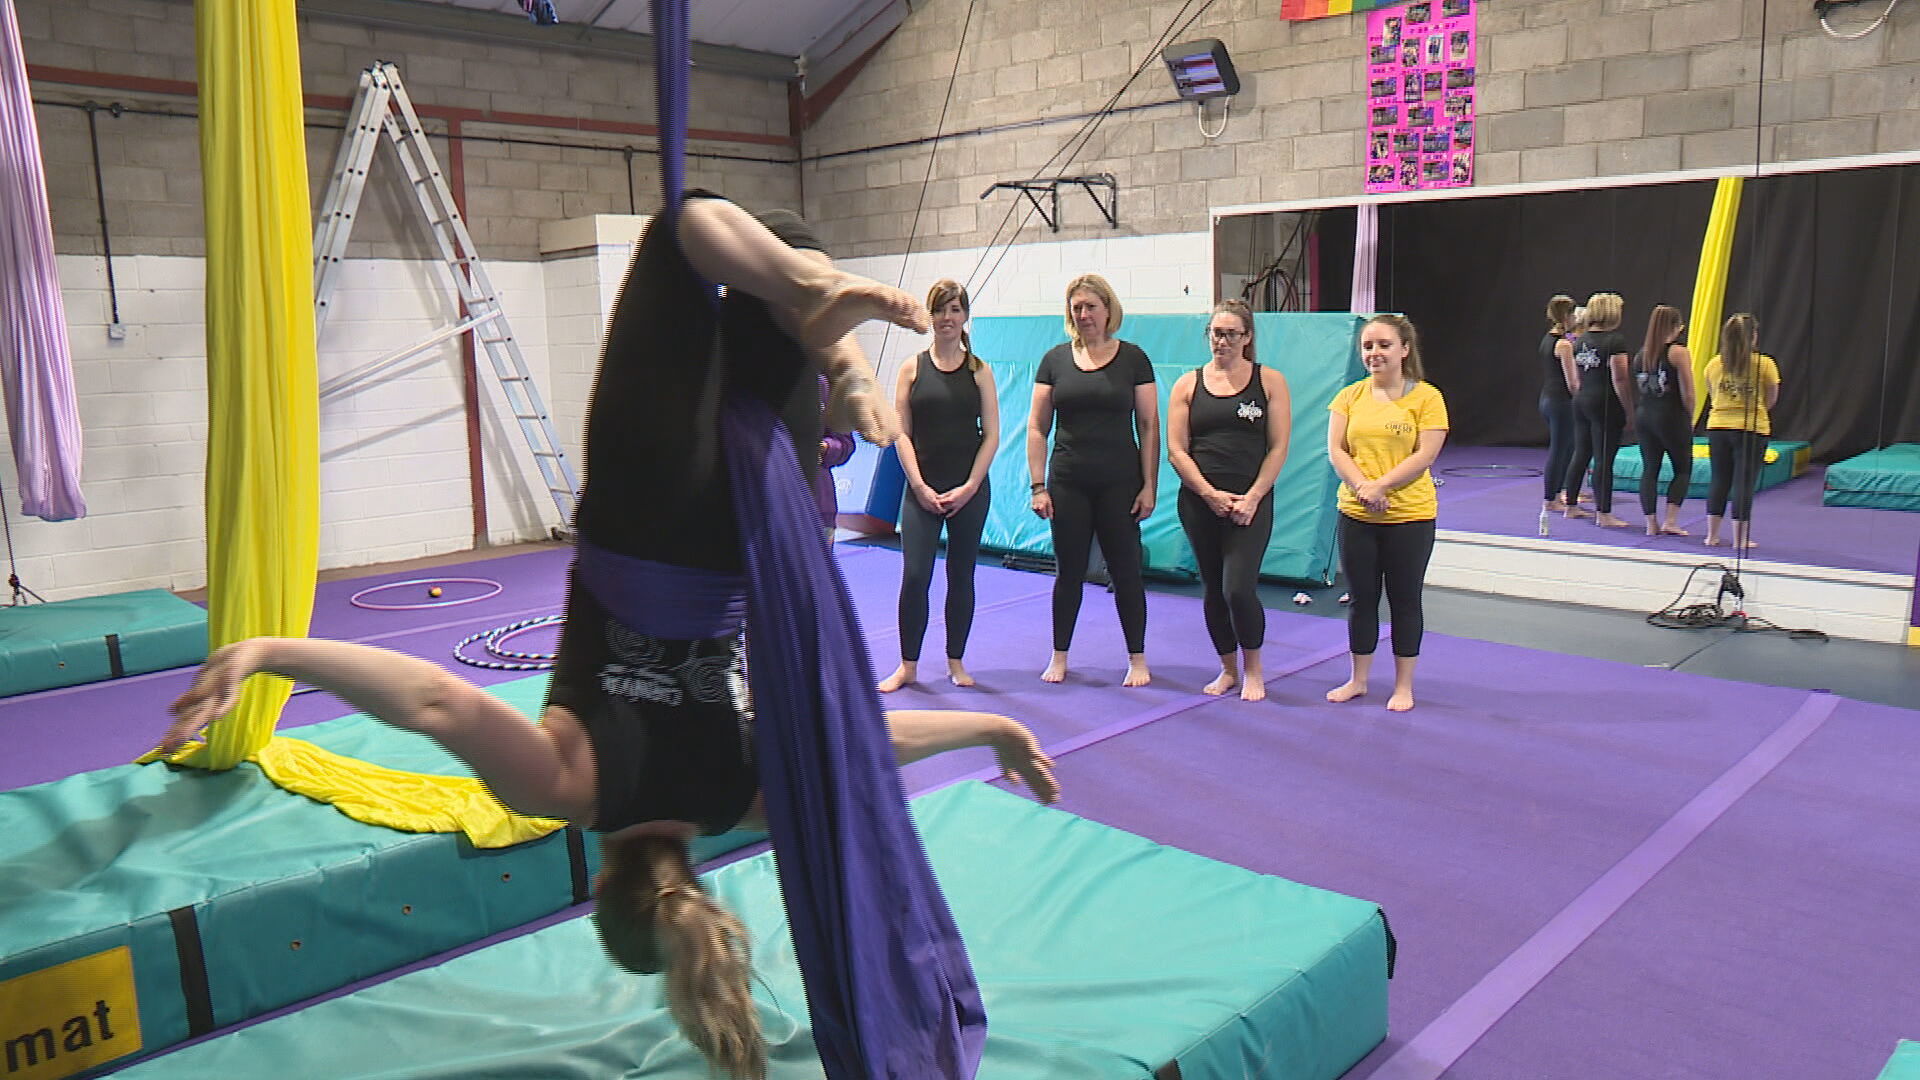 Suzie Bee said acrobatics helps boost confidence and makes the 'impossible possible'